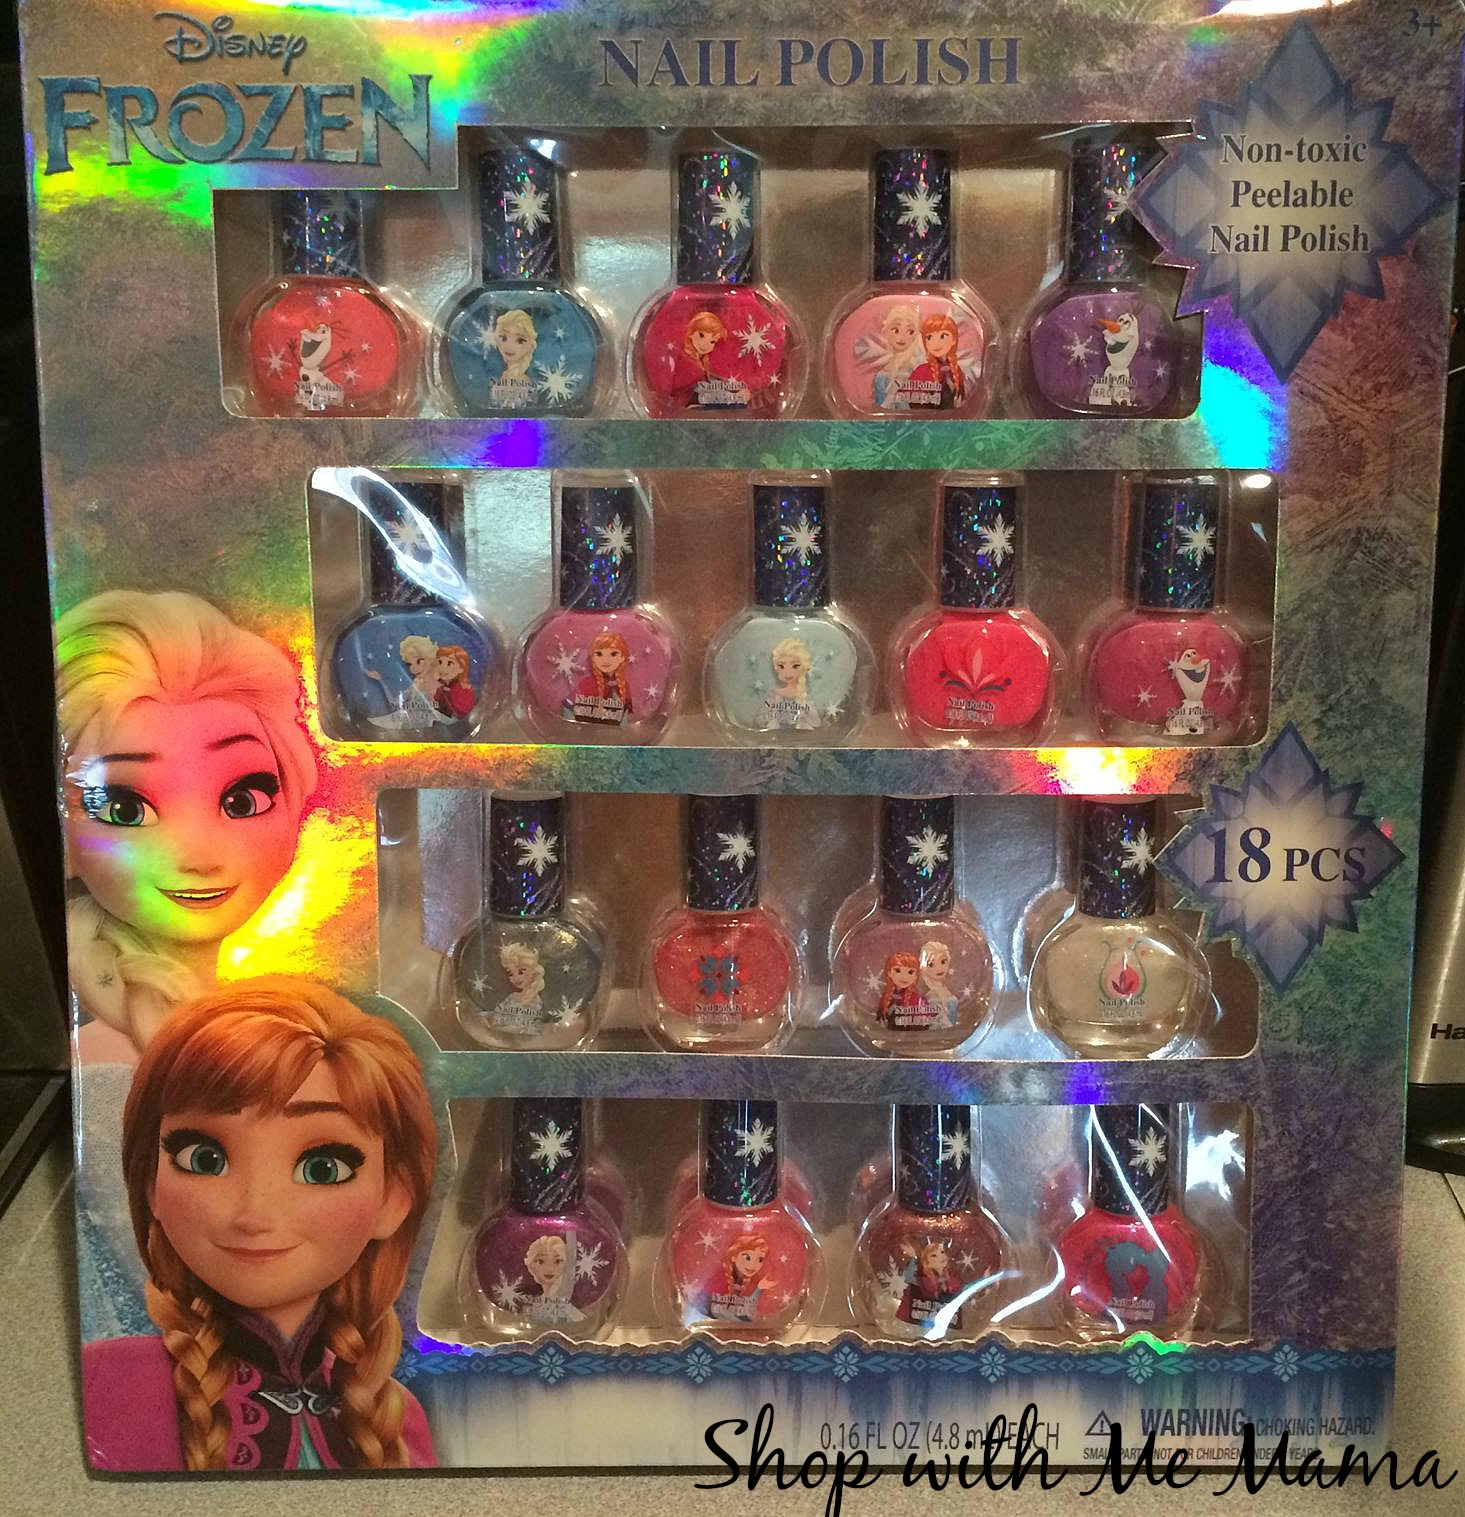 Frozen Disney Nail Polish Set For Little Girls Review and Giveaway